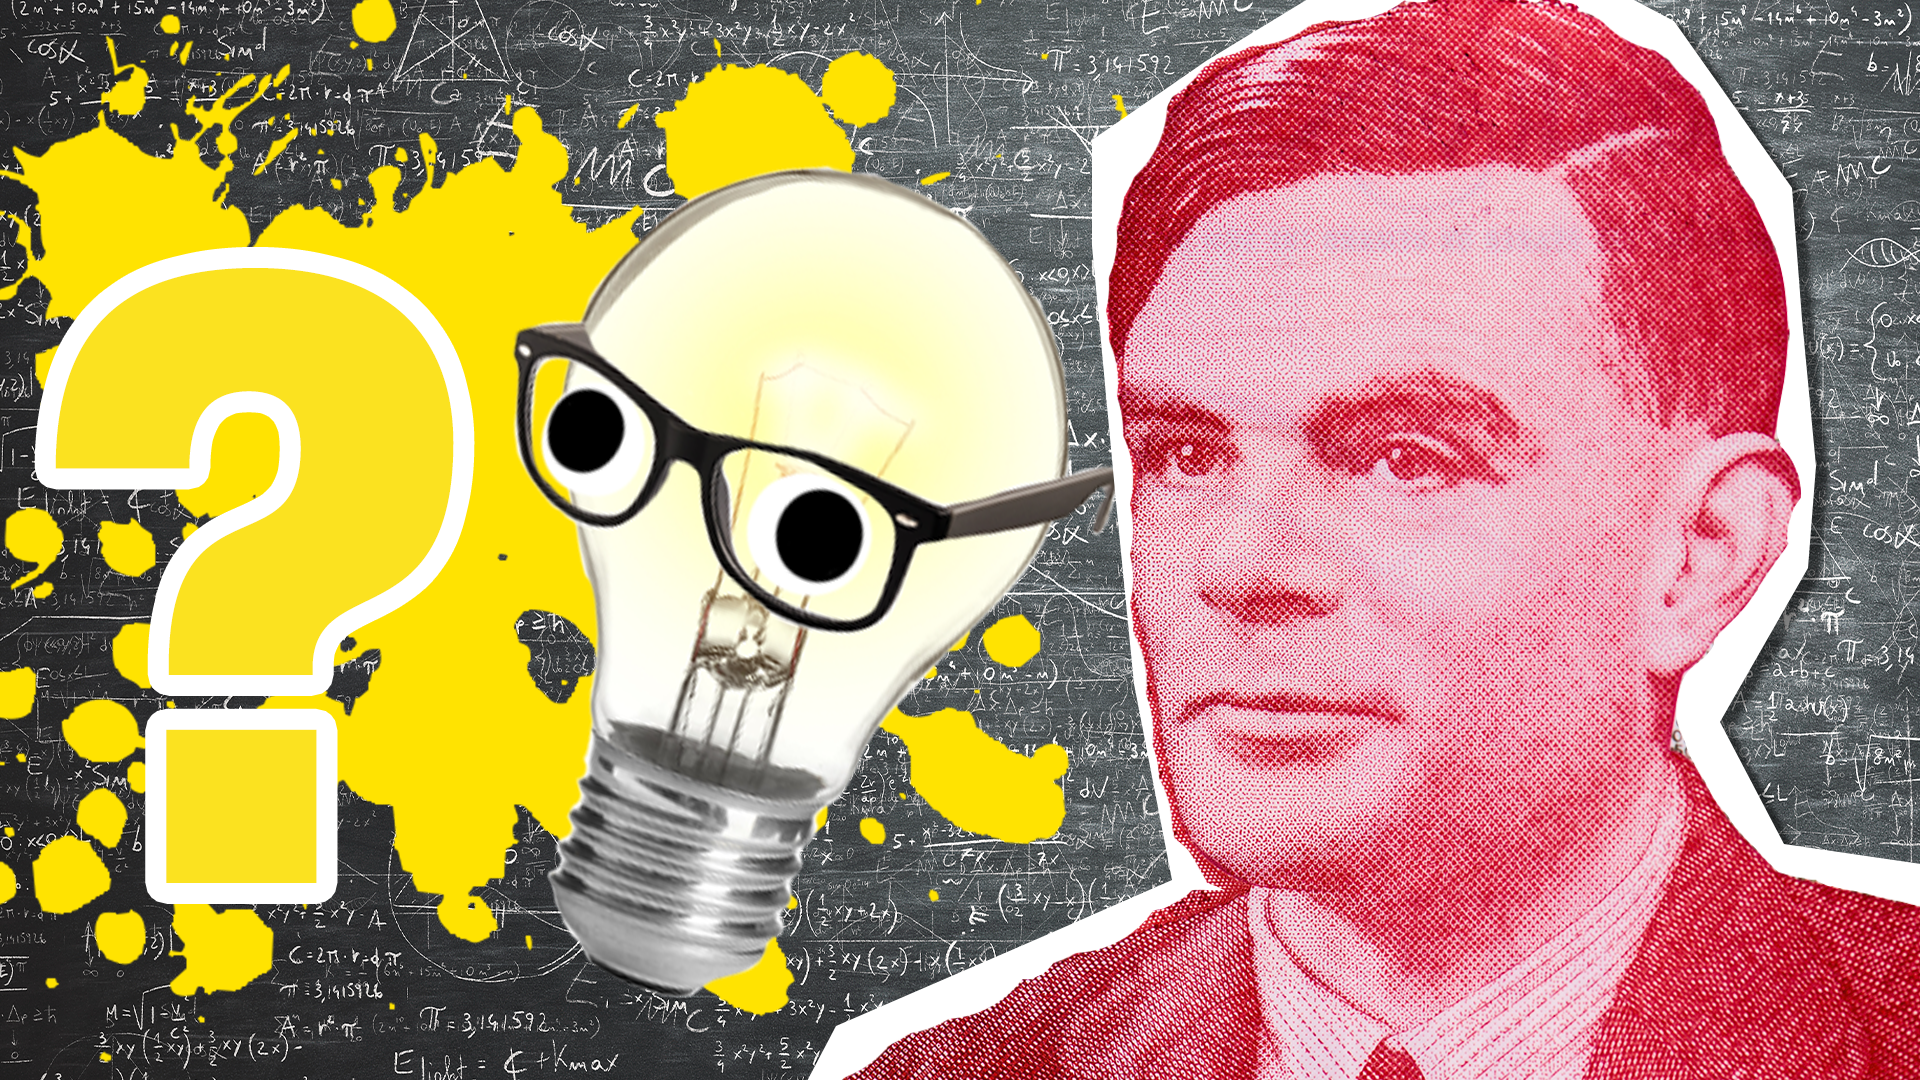 Interesting Facts About the Man Who Broke the Enigma – Alan Turing